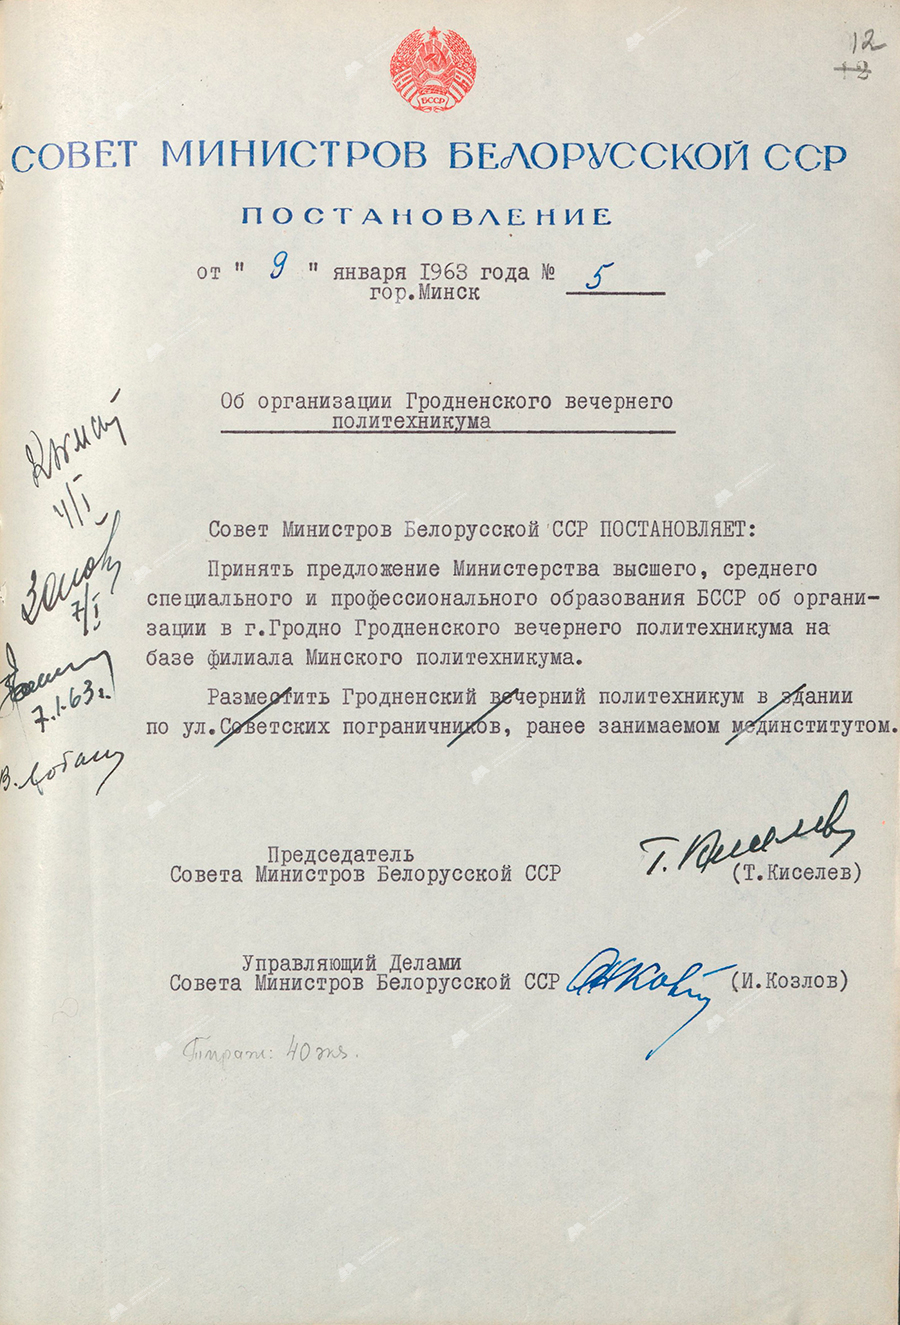 Resolution No. 5 of the Council of Ministers of the BSSR «On the organization of the Grodno Evening Polytechnic School»-стр. 1